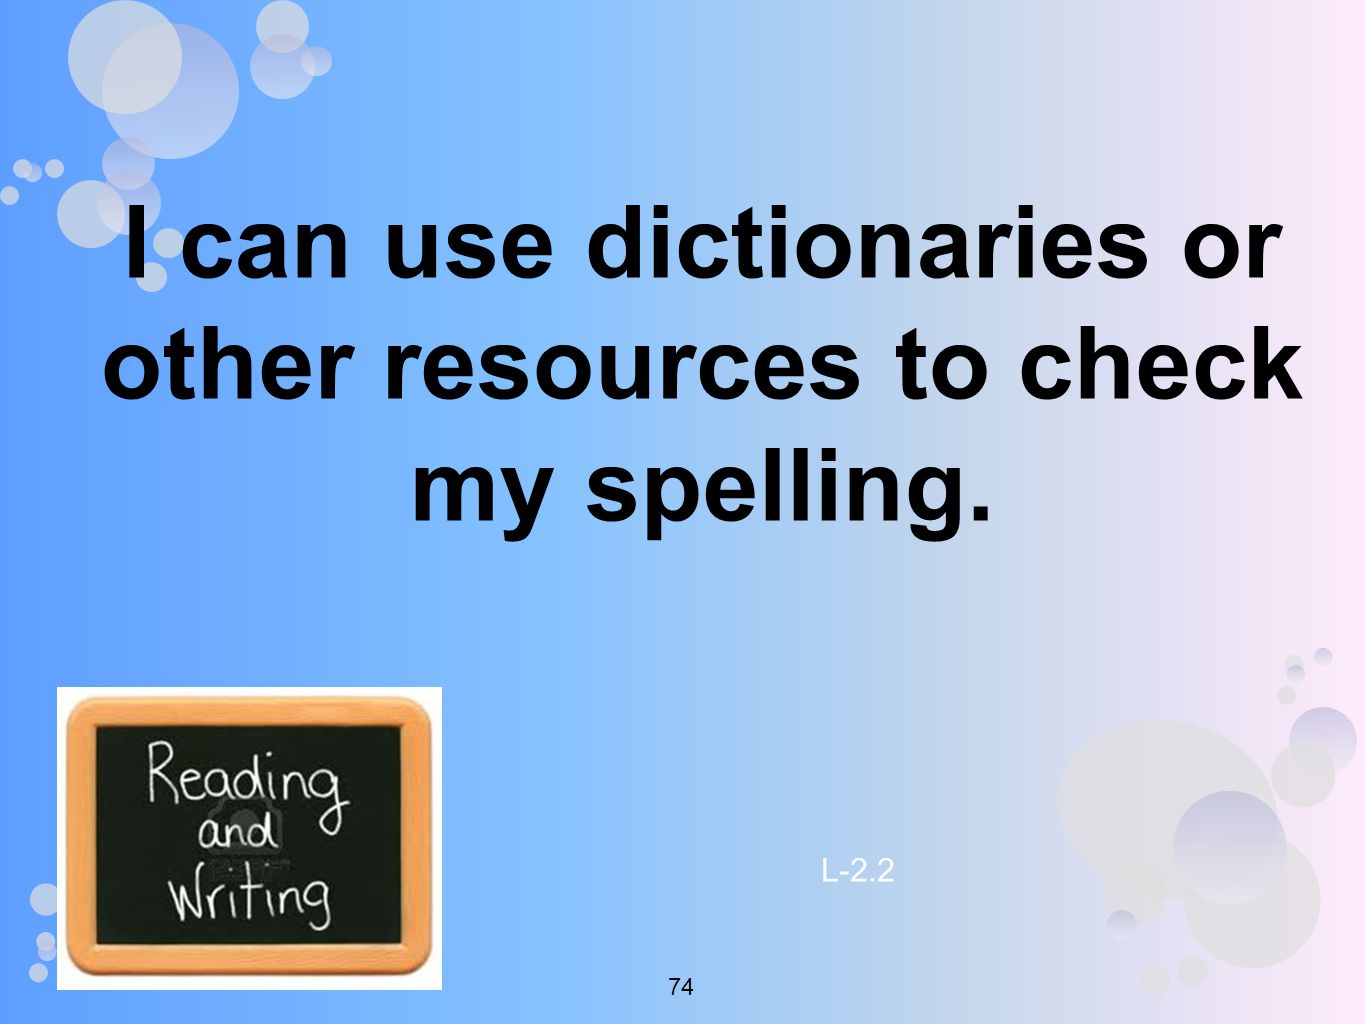 I can use dictionaries or other resources to check my spelling. L